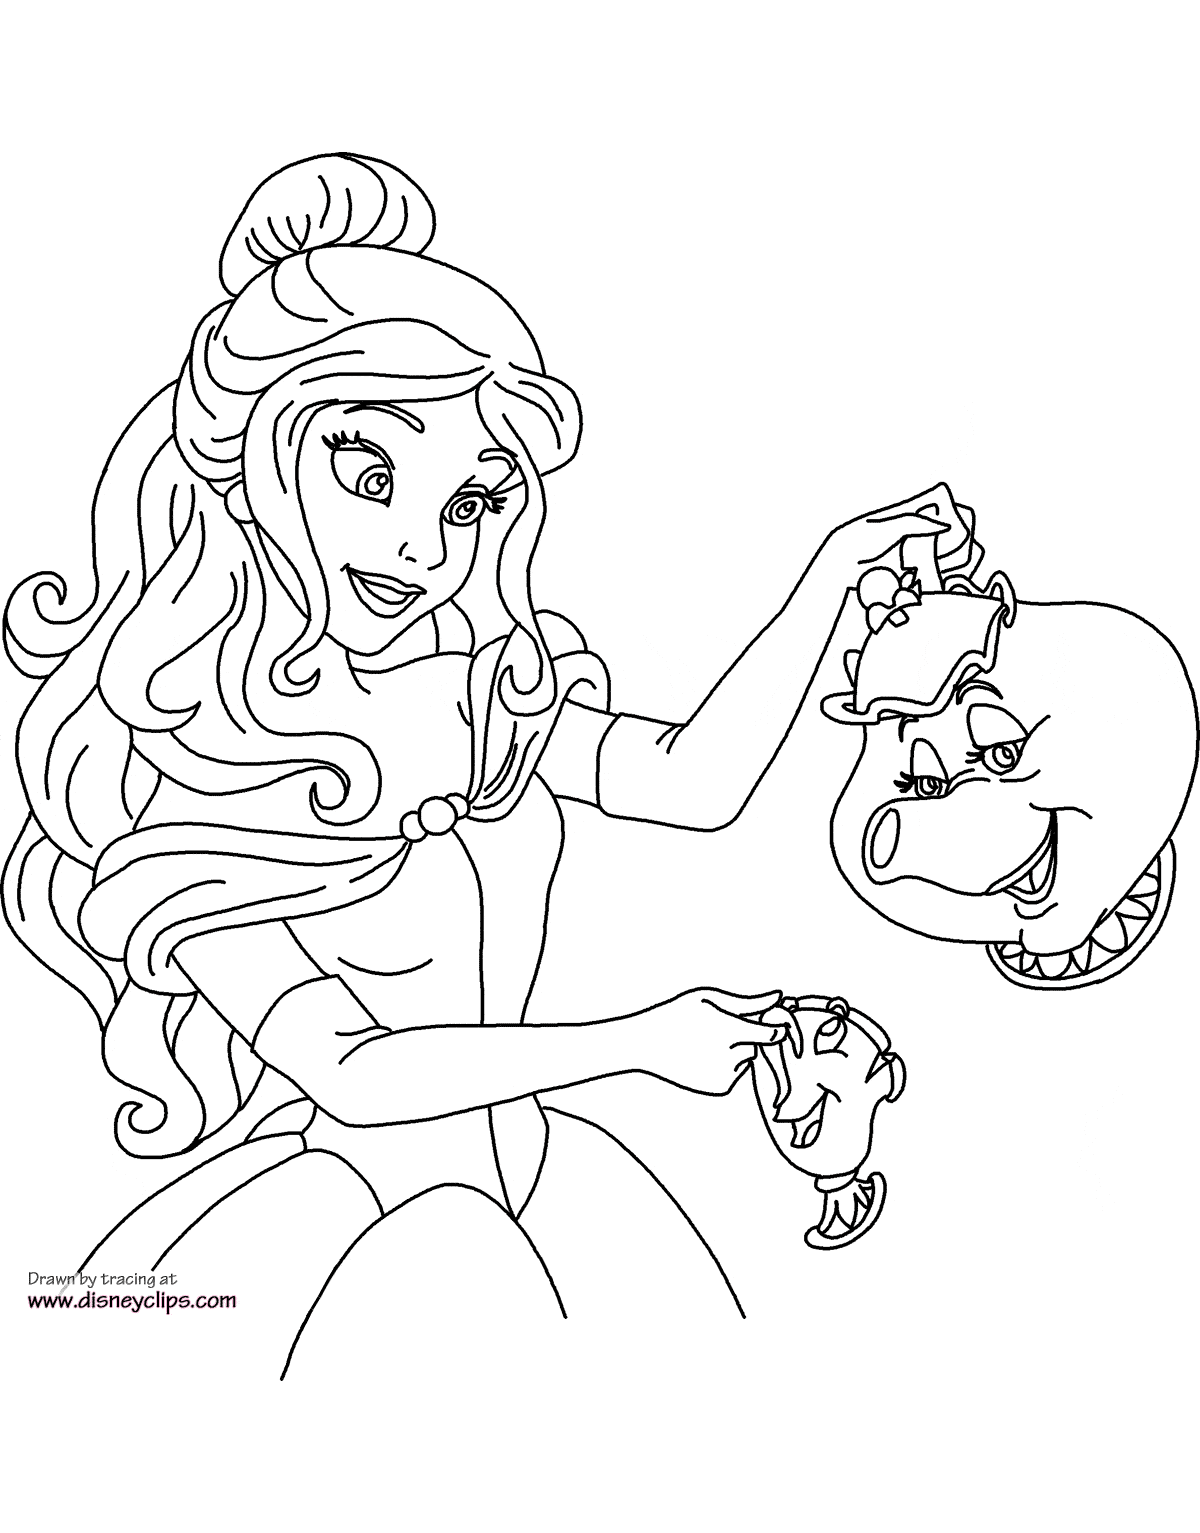 Download Beauty and the Beast Coloring Pages (3) | Disneyclips.com